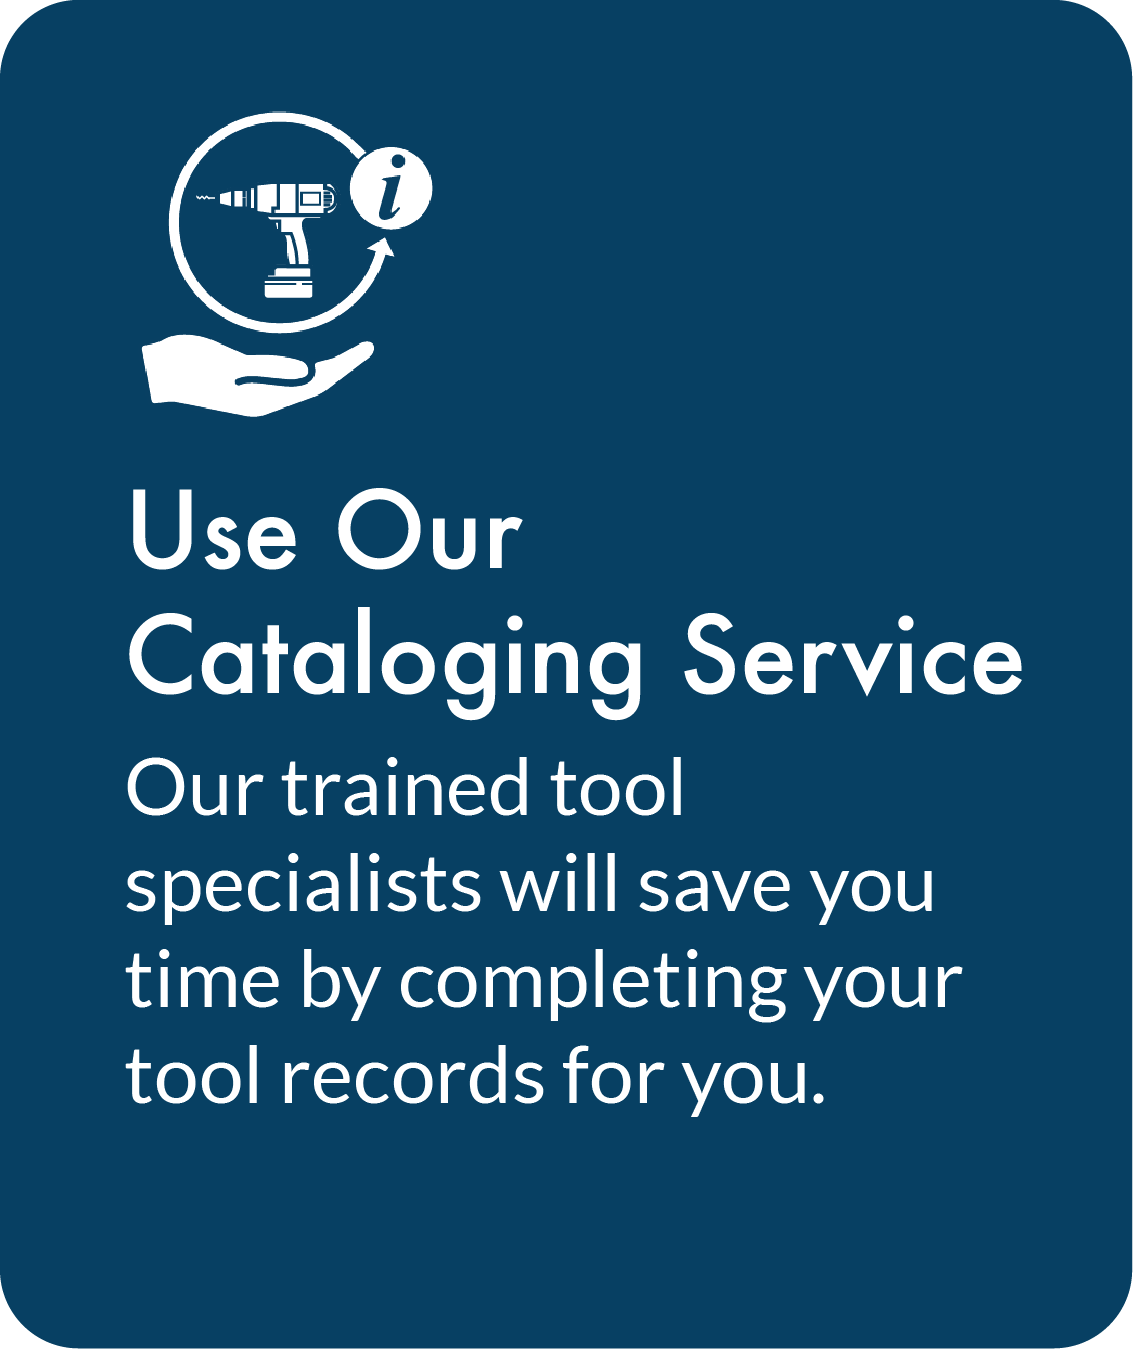 Use Our Cataloging Service. Our trained tool specialists will save you time by completing your tool records for you.